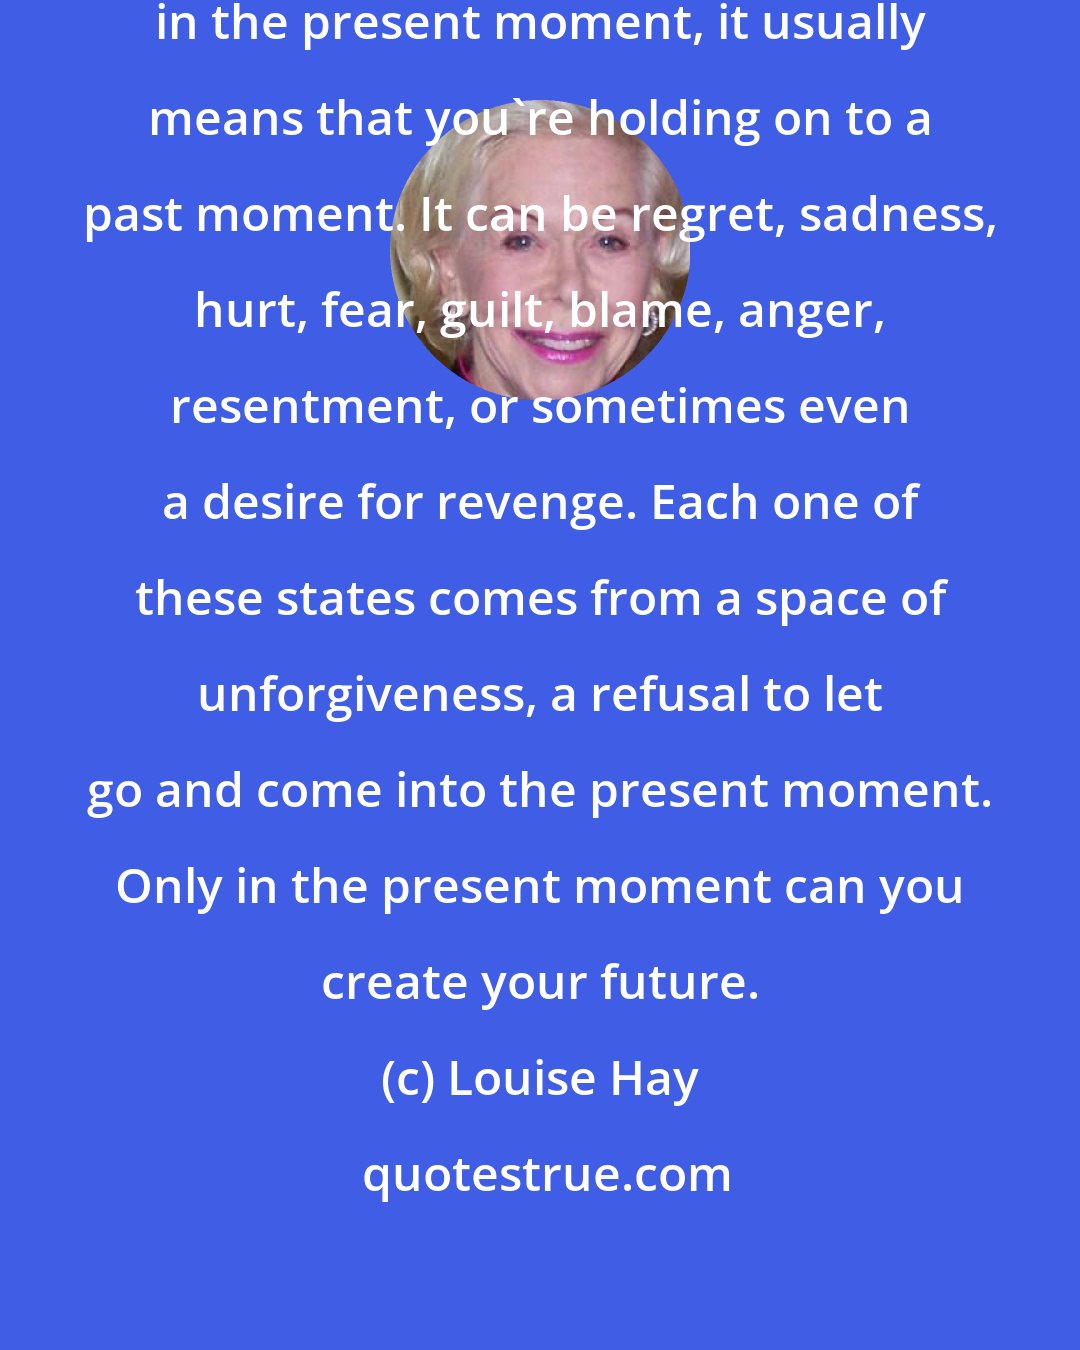 Louise Hay: When you don't flow freely with life in the present moment, it usually means that you're holding on to a past moment. It can be regret, sadness, hurt, fear, guilt, blame, anger, resentment, or sometimes even a desire for revenge. Each one of these states comes from a space of unforgiveness, a refusal to let go and come into the present moment. Only in the present moment can you create your future.